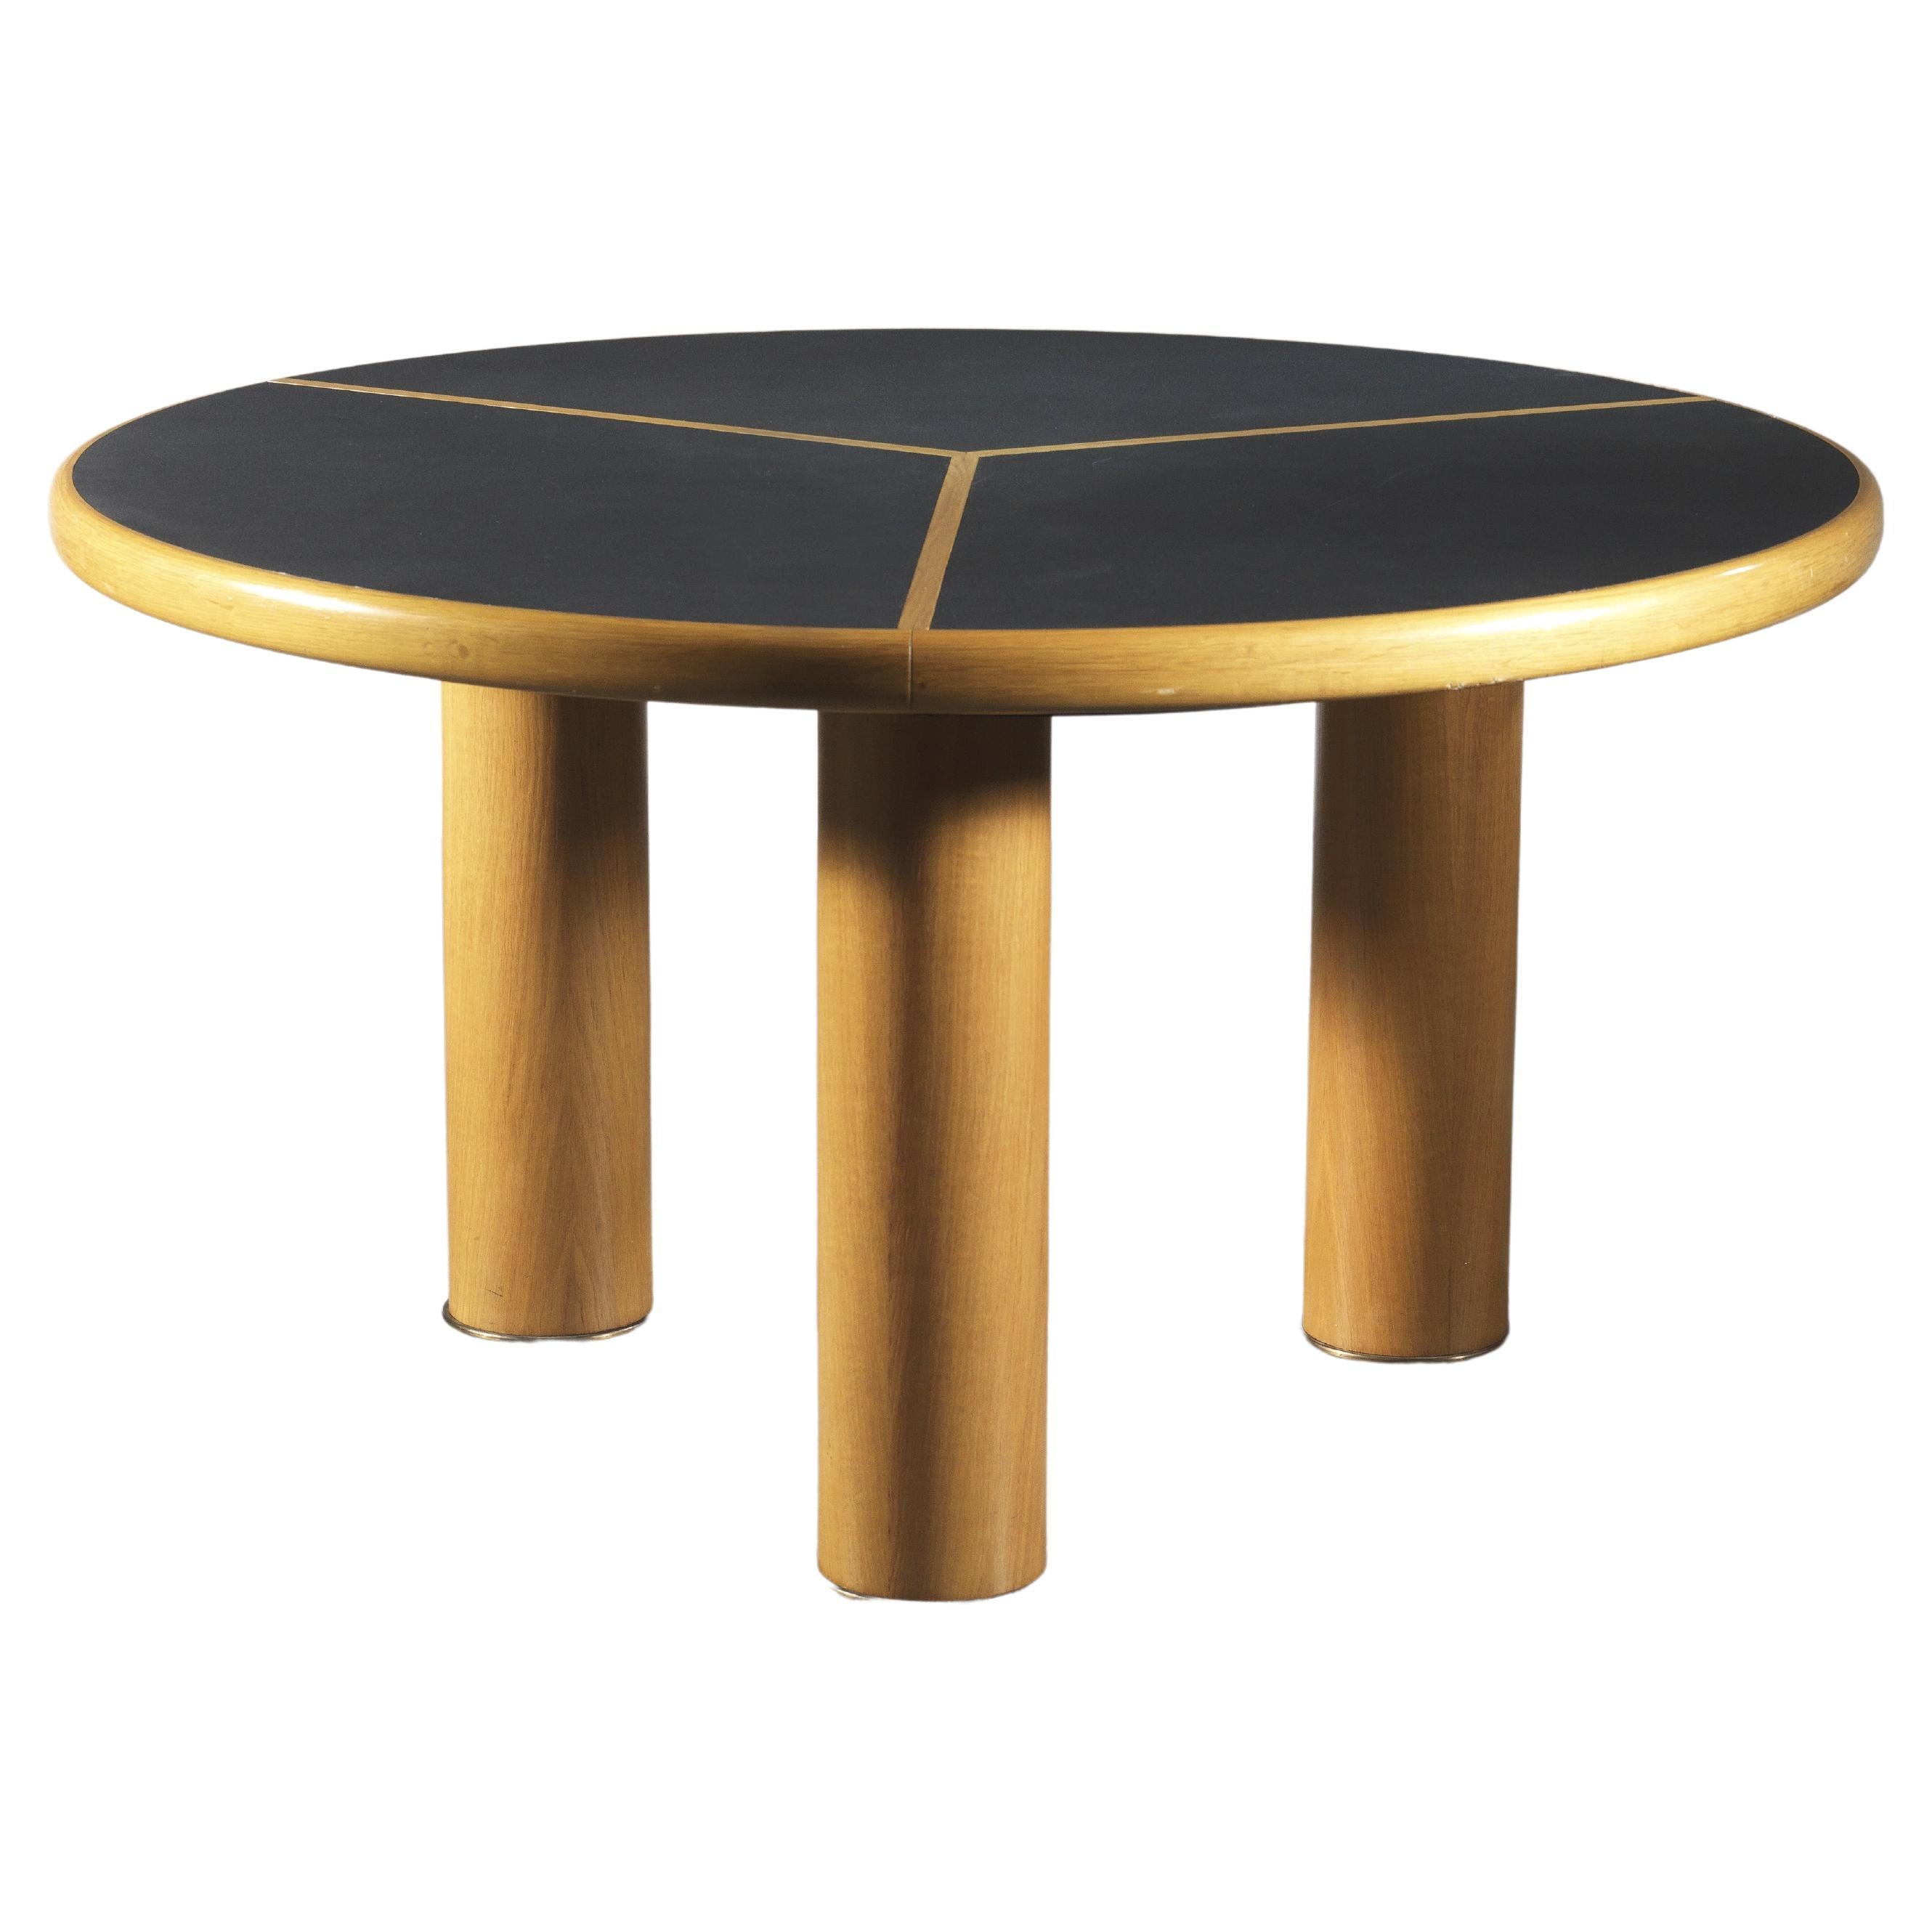 Sculptural Round table in wood, brass and dark laminate, Italy 1970s